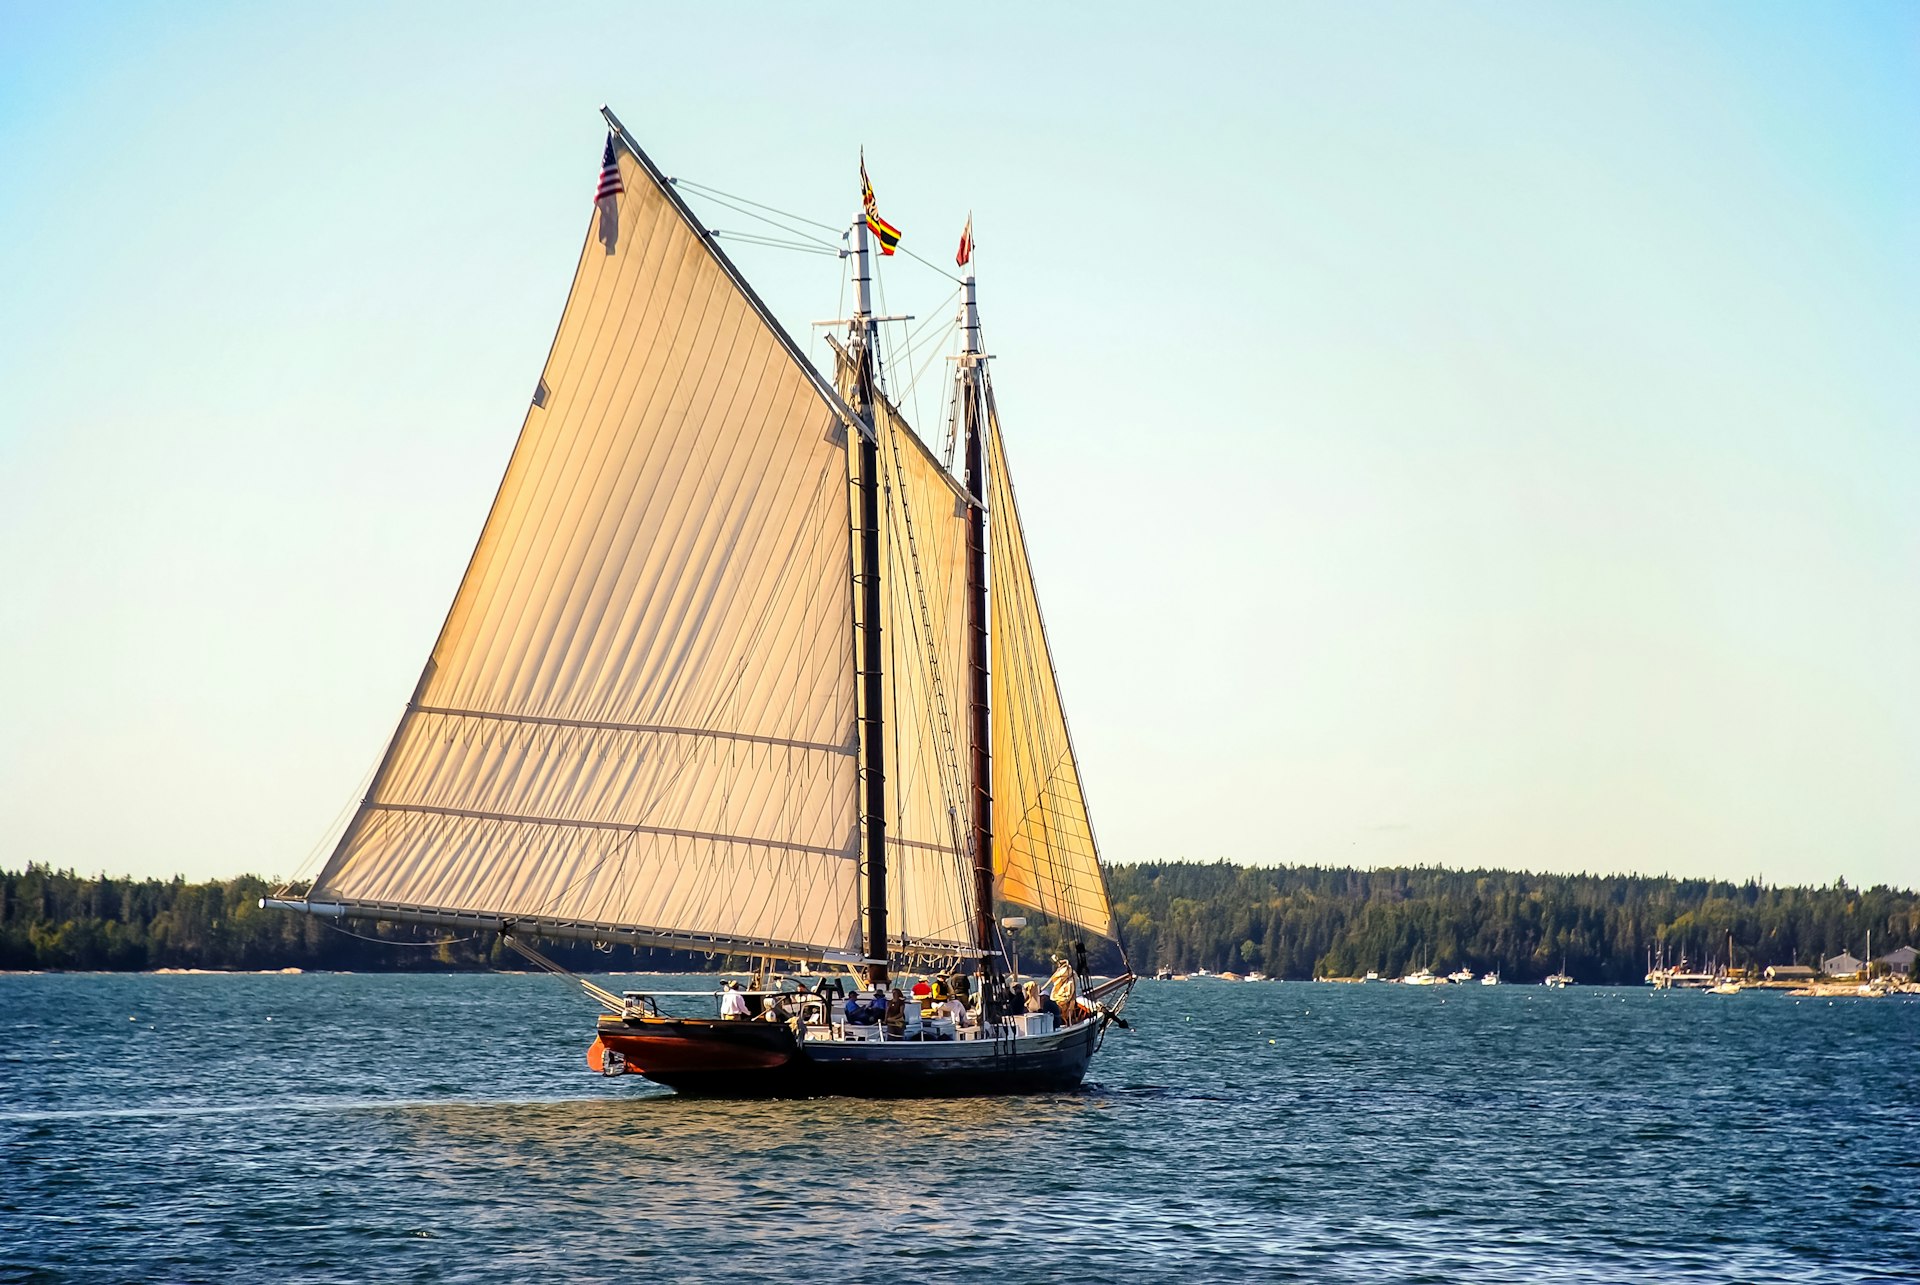 Backlit sails of a vintage Maine windjammer billow in the stiff breeze as the sailboat navigates the coast of Maine